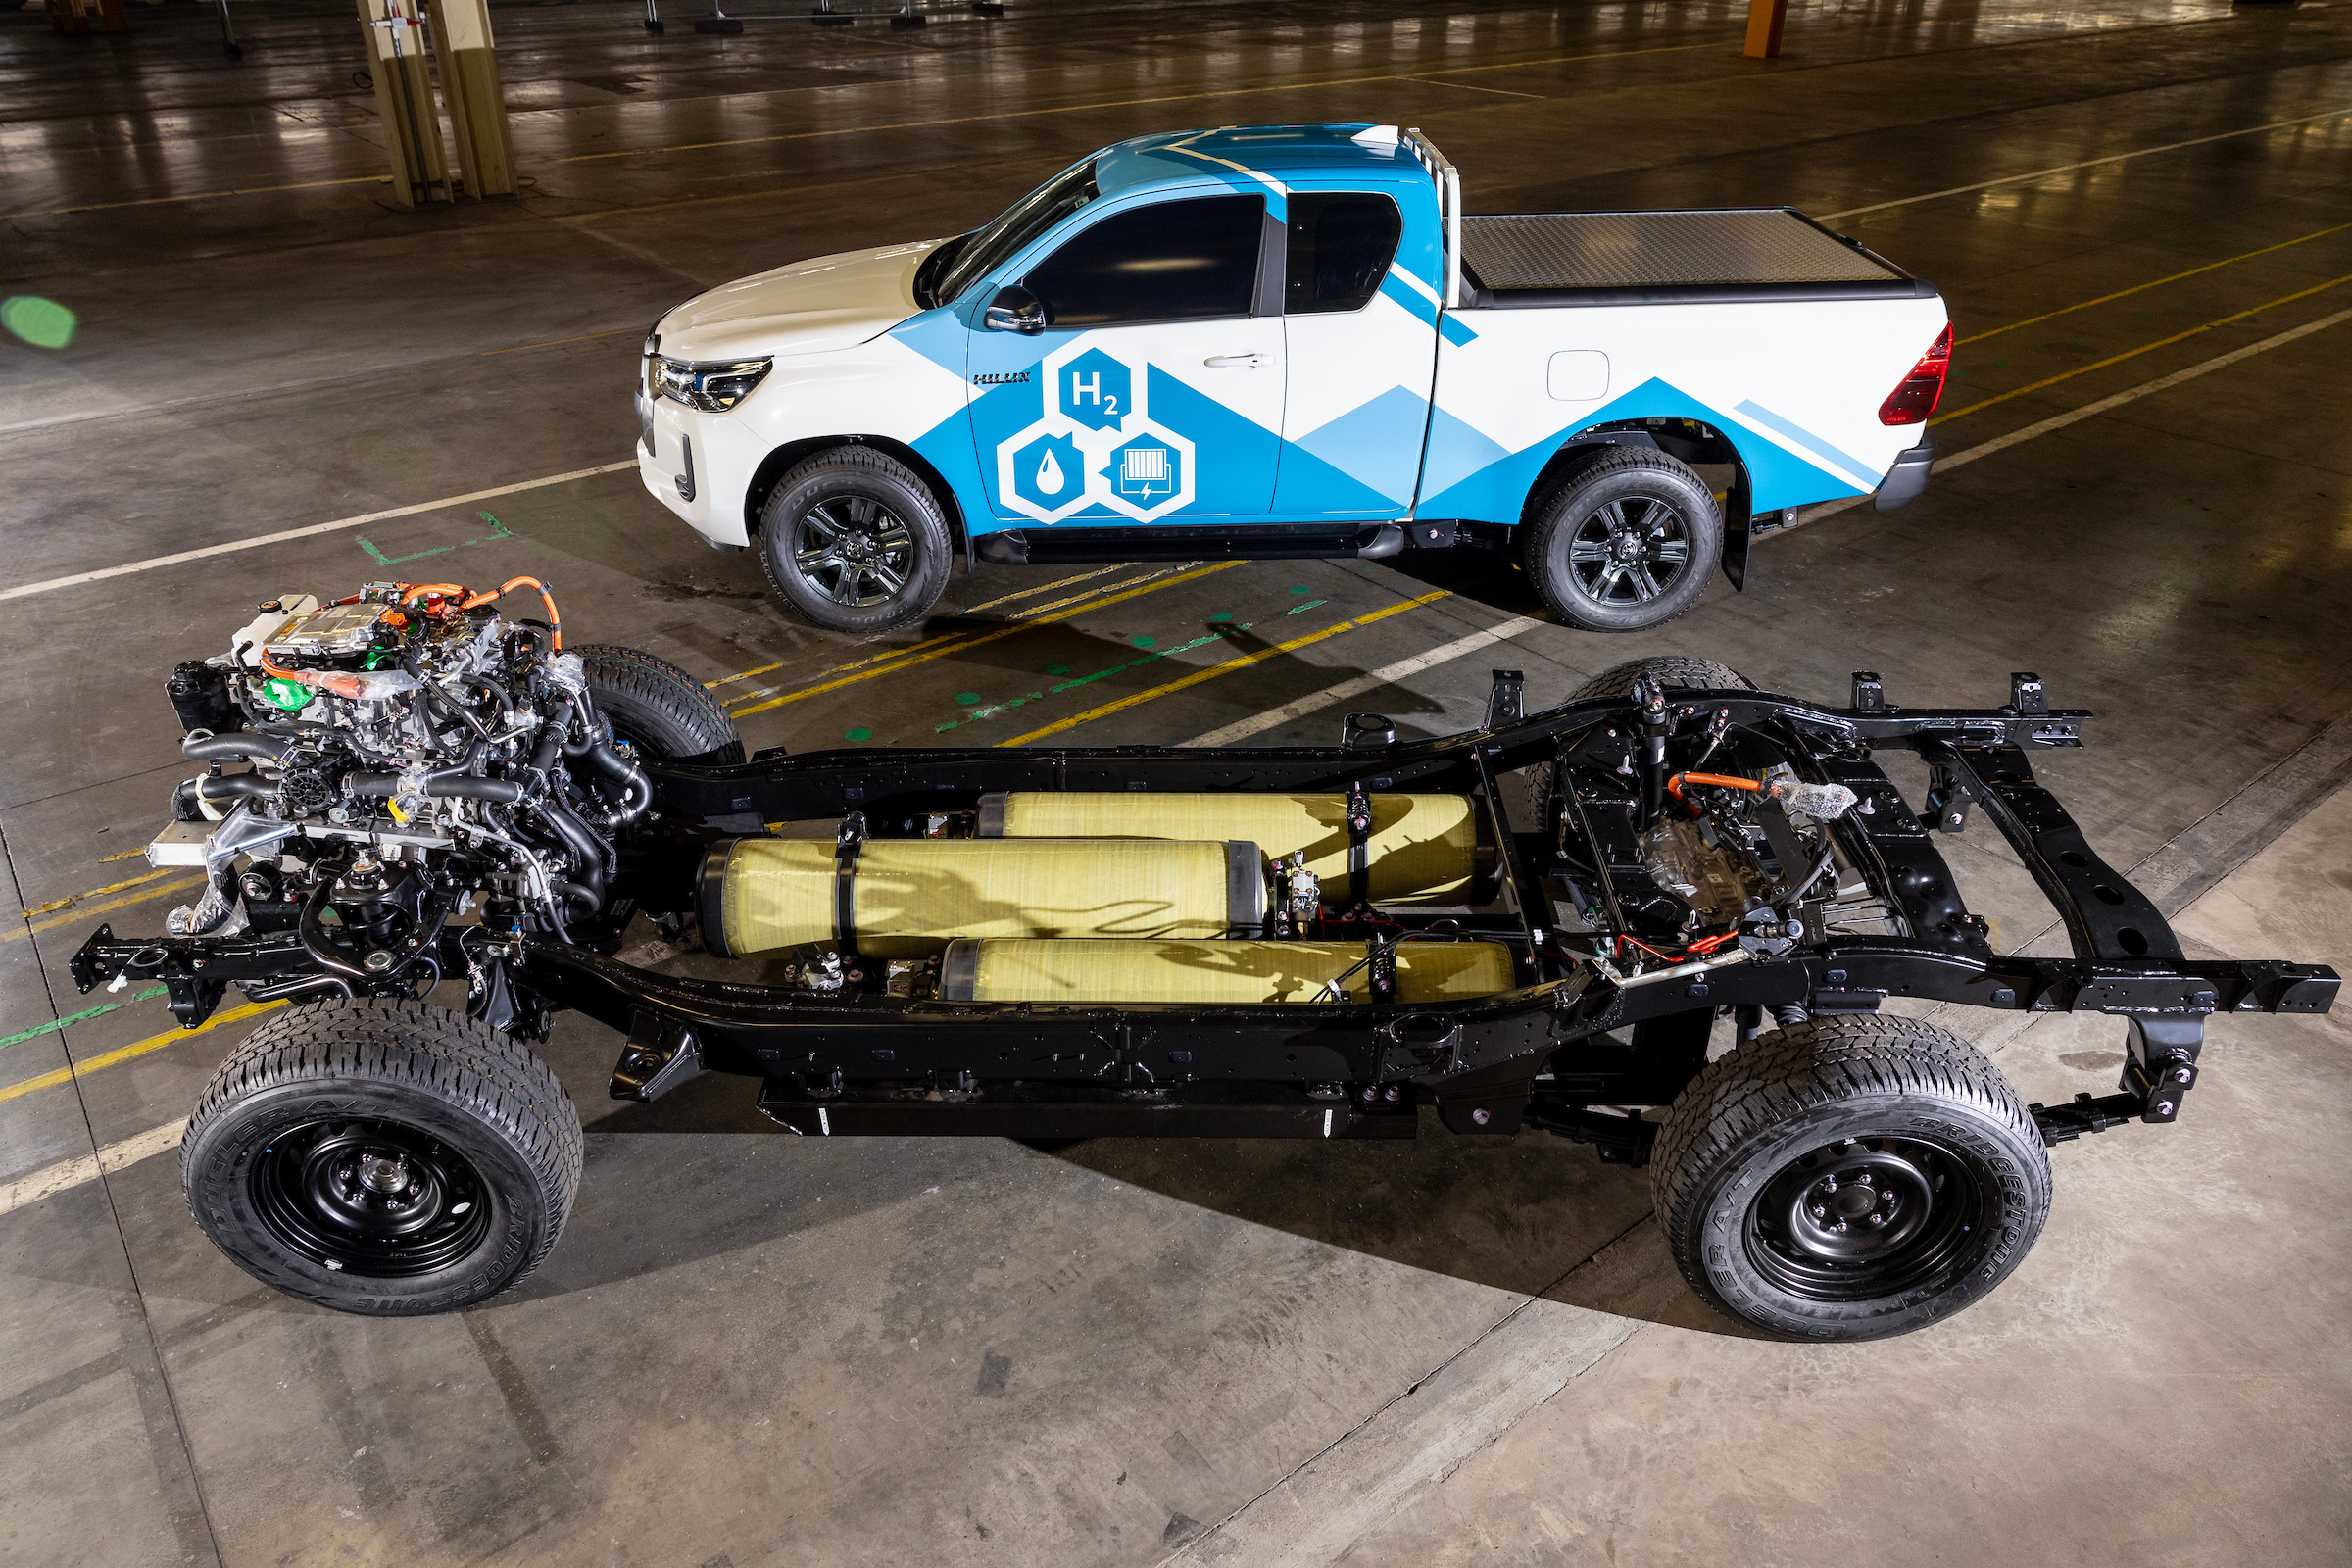 https://e-vehicleinfo.com/global/hydrogen-fuel-cell-electric-hilux-unviled-by-toyota-provides-range-of-600-km/